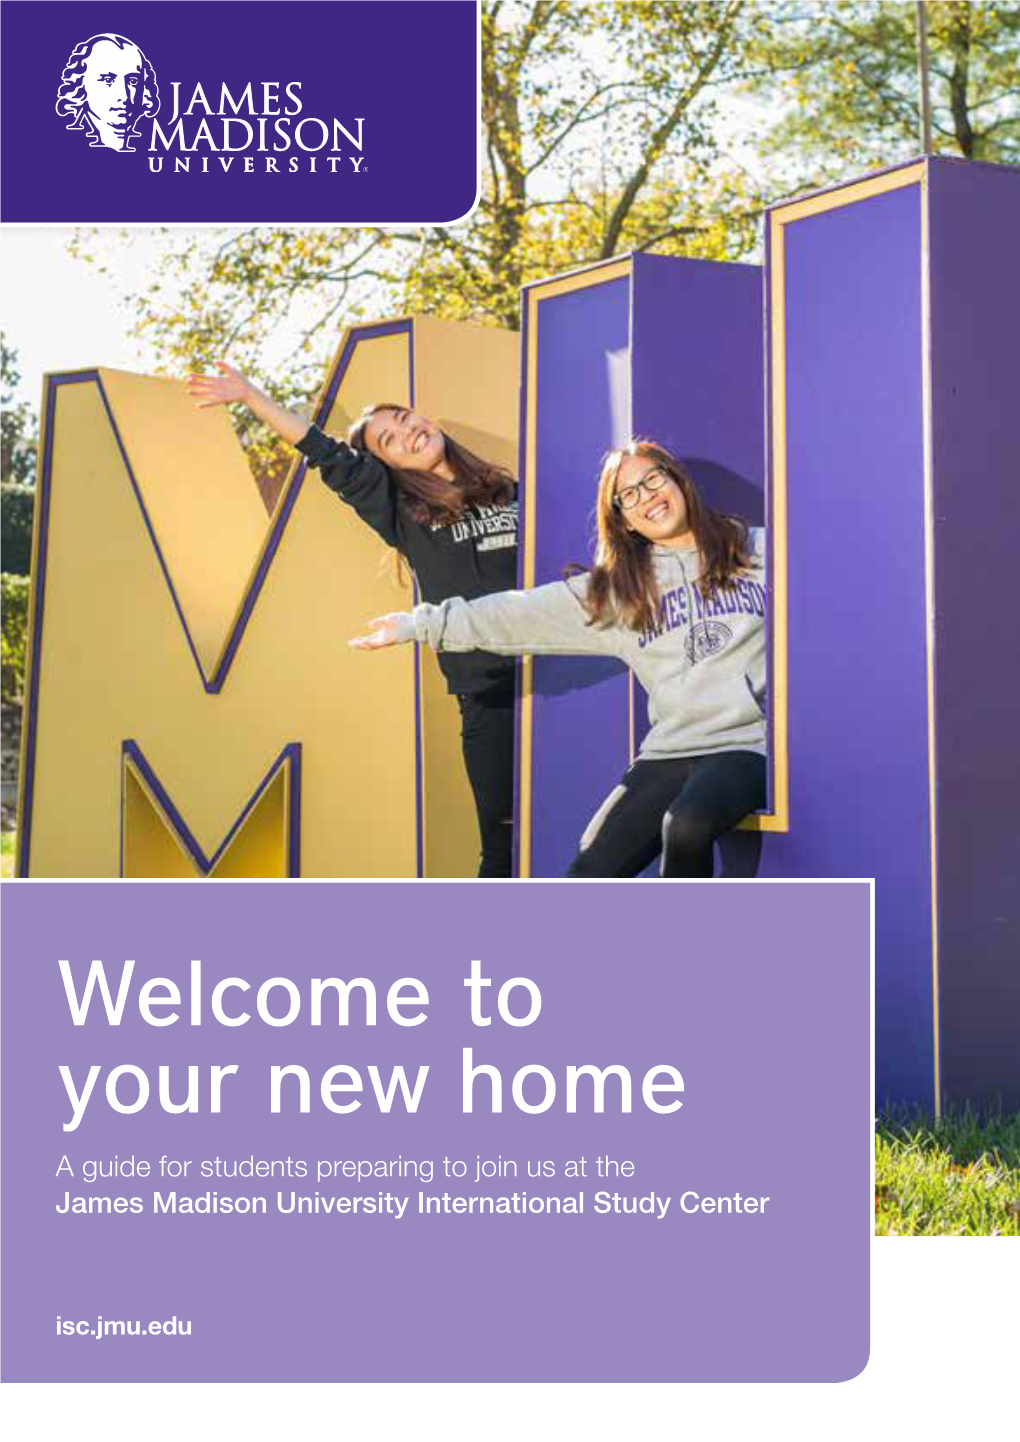 Your New Home a Guide for Students Preparing to Join Us at the James Madison University International Study Center